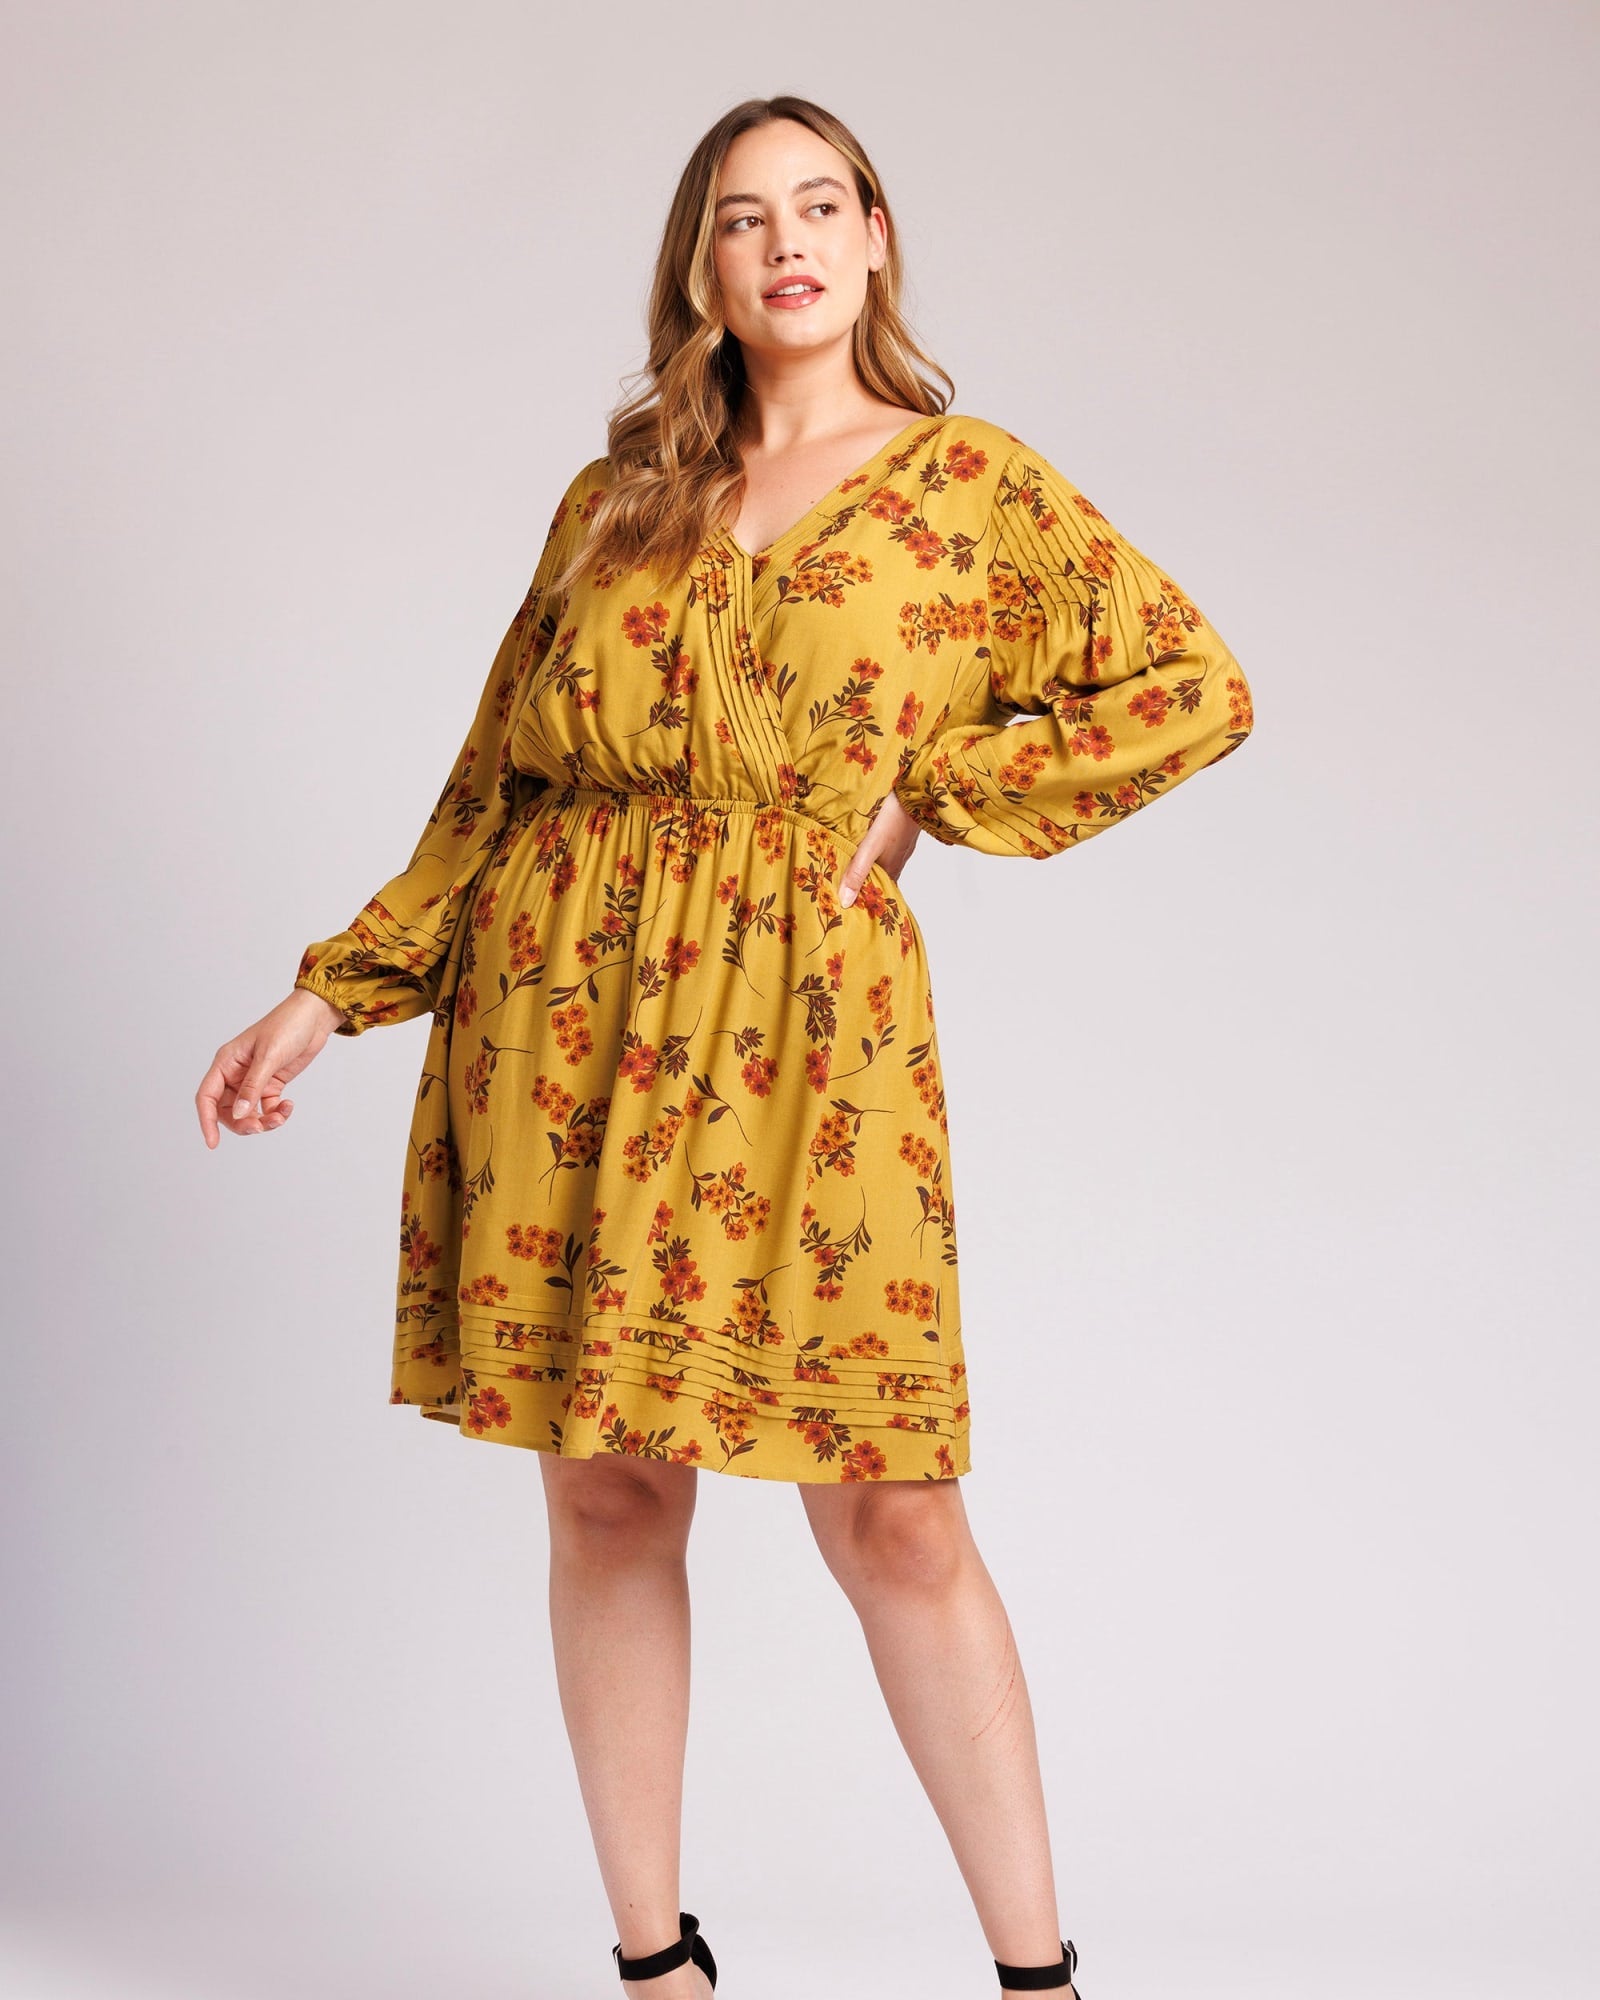 Catherine Long Sleeve Floral Dress | o314 YELLOW